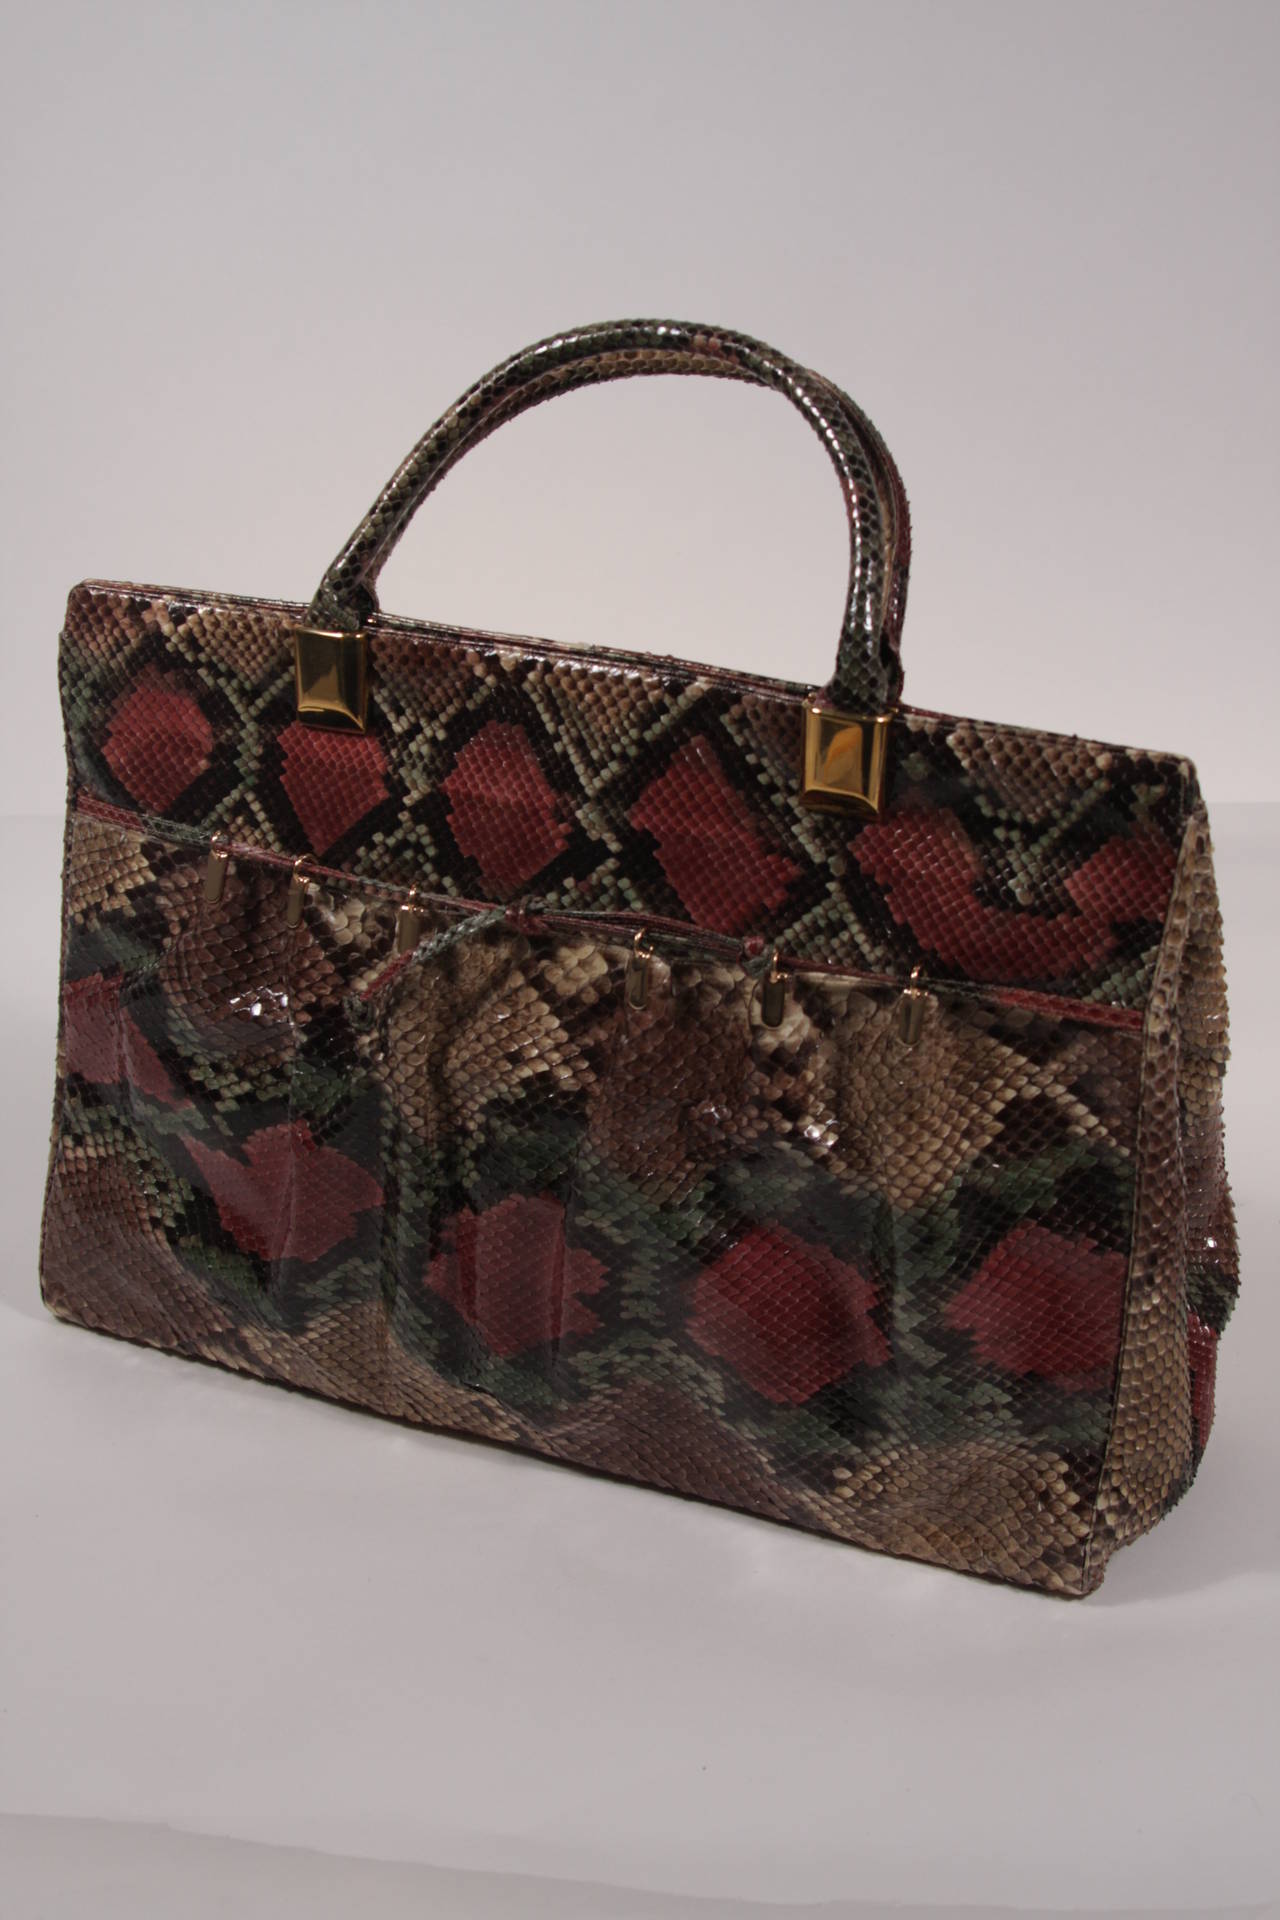 This is a gorgeous Judith Leiber tote. The handbag is composed of a striking multi-colored snakeskin and features a front pocket with gather details. There are two interior zipper compartments and snap closures. Comes with large coin purse attached